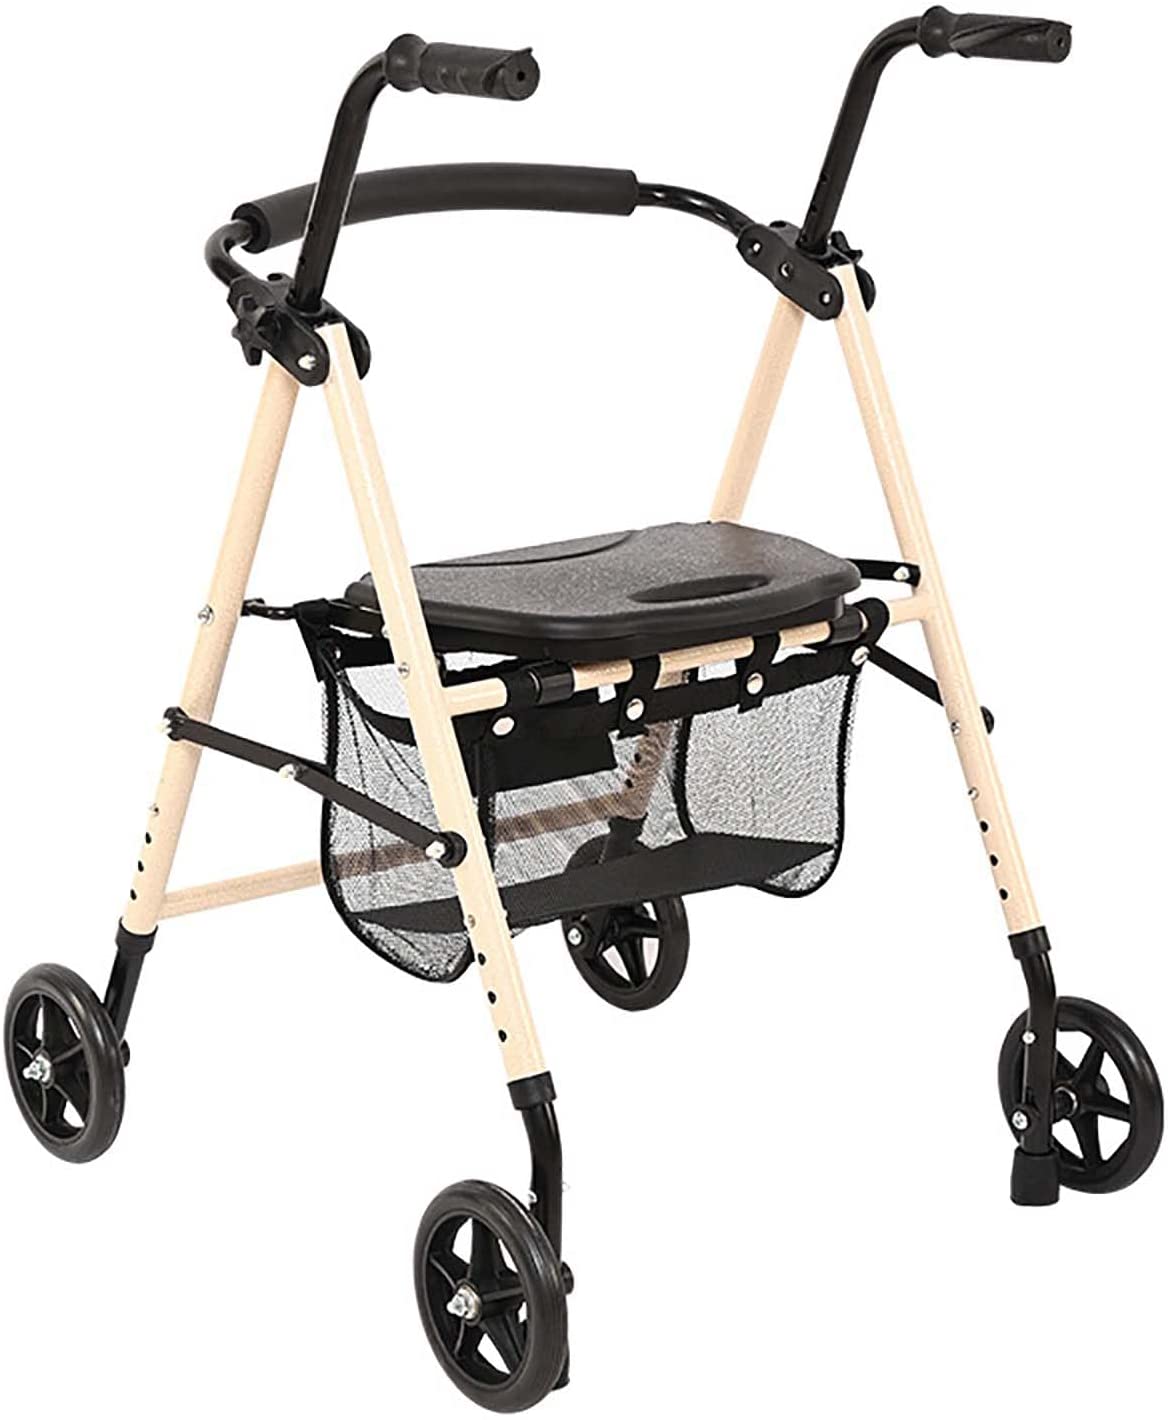 Better Angel HM Easy Folding Rollator - Rollator Foldable and Lightweight, Lightweight Rollator, Folding Walking Aid, Lightweight Rollator, Foldable Walking Frame with Seat